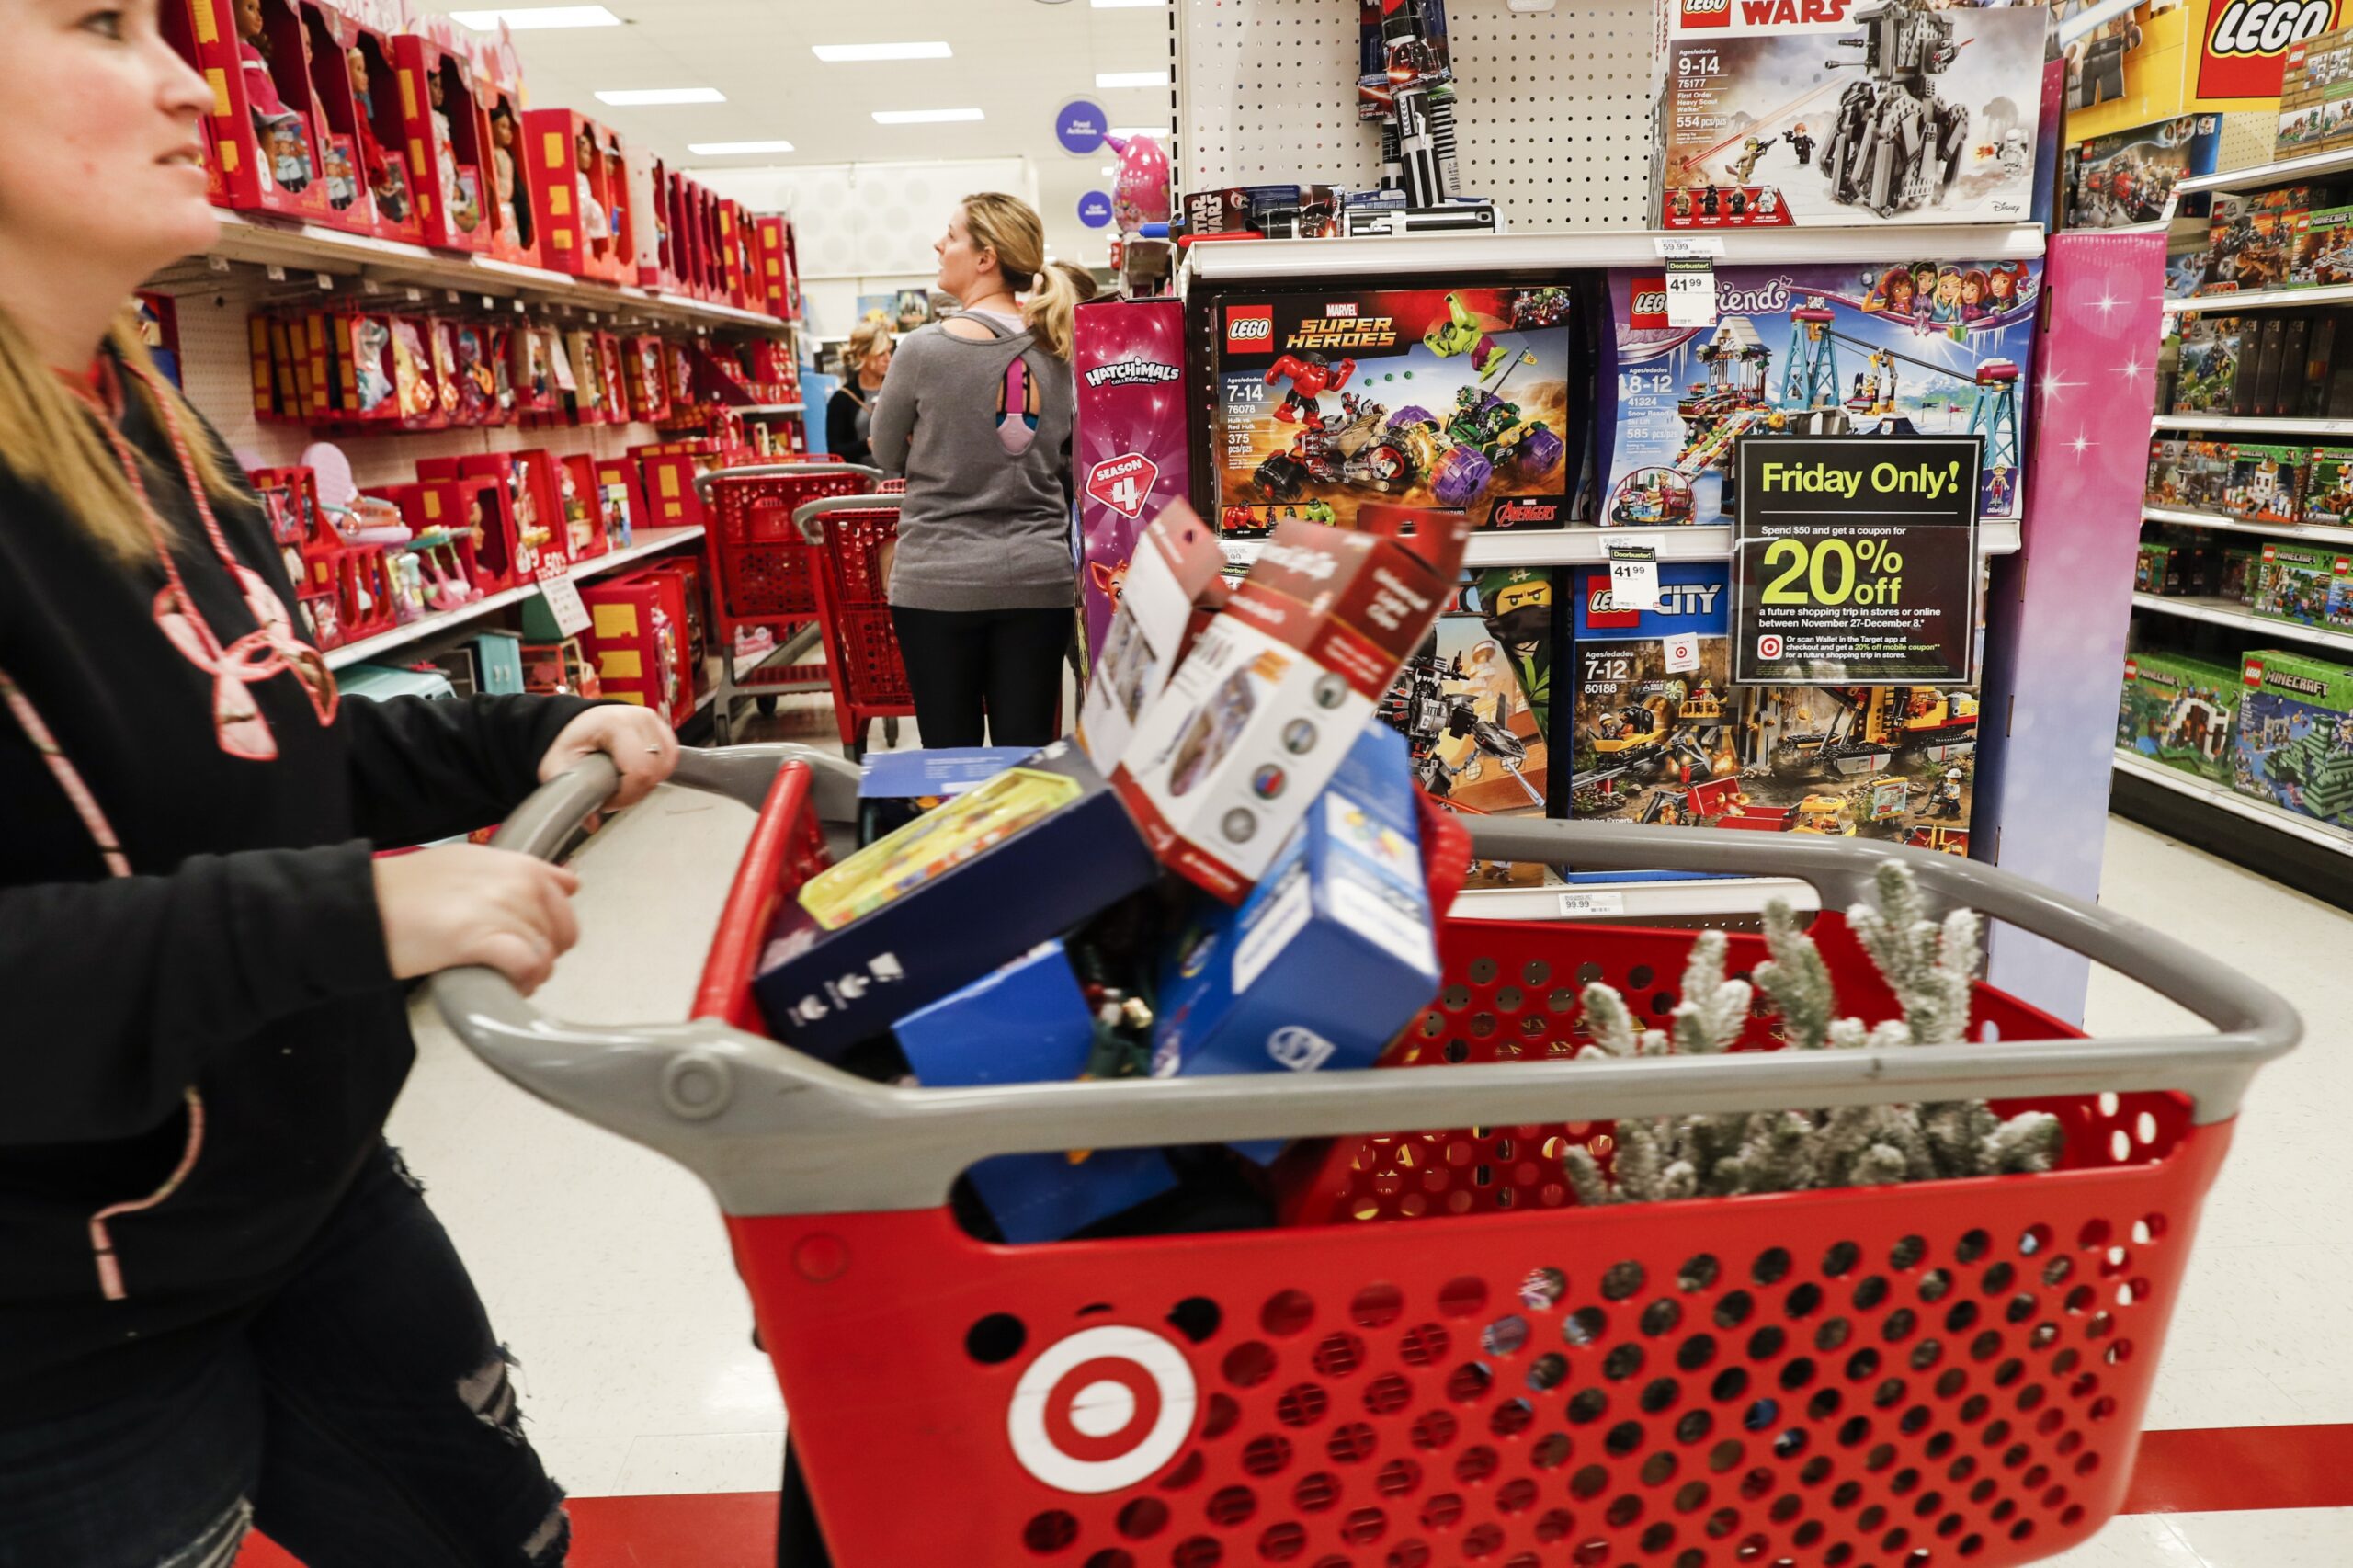 Retail Experts Say Black Friday Will Be Very Different For Retail Industry This Year